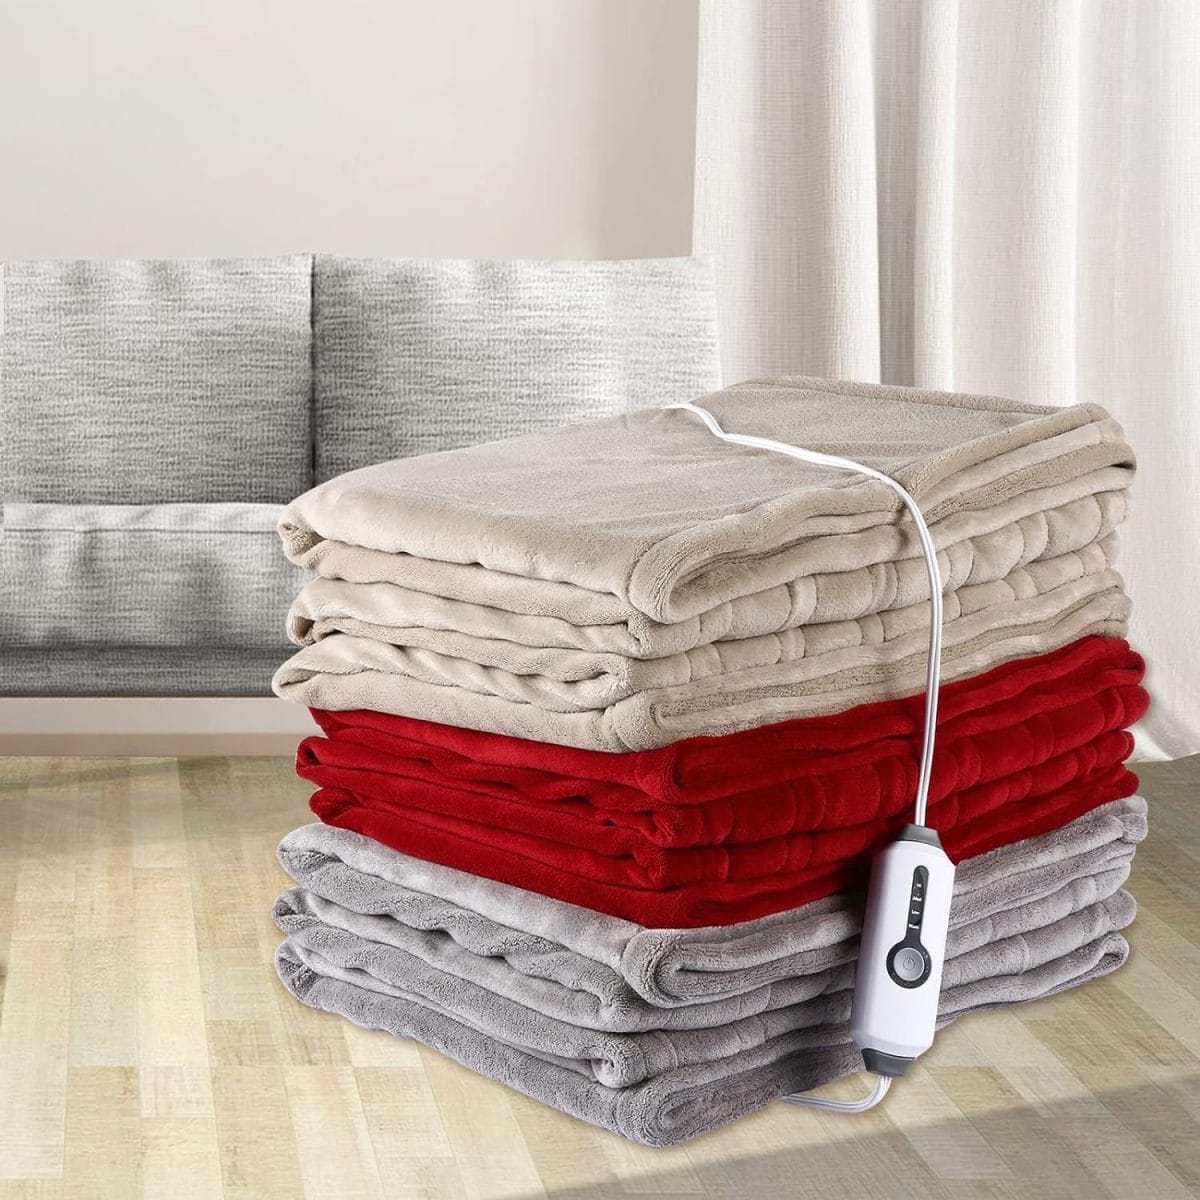 Electric Heated Blanket 72x84 Full Size with 4 Heating Levels and 10 Hours Auto-Off Large Oversized Heating Blanket with Soft Plush Fabric for Bedding - Gray